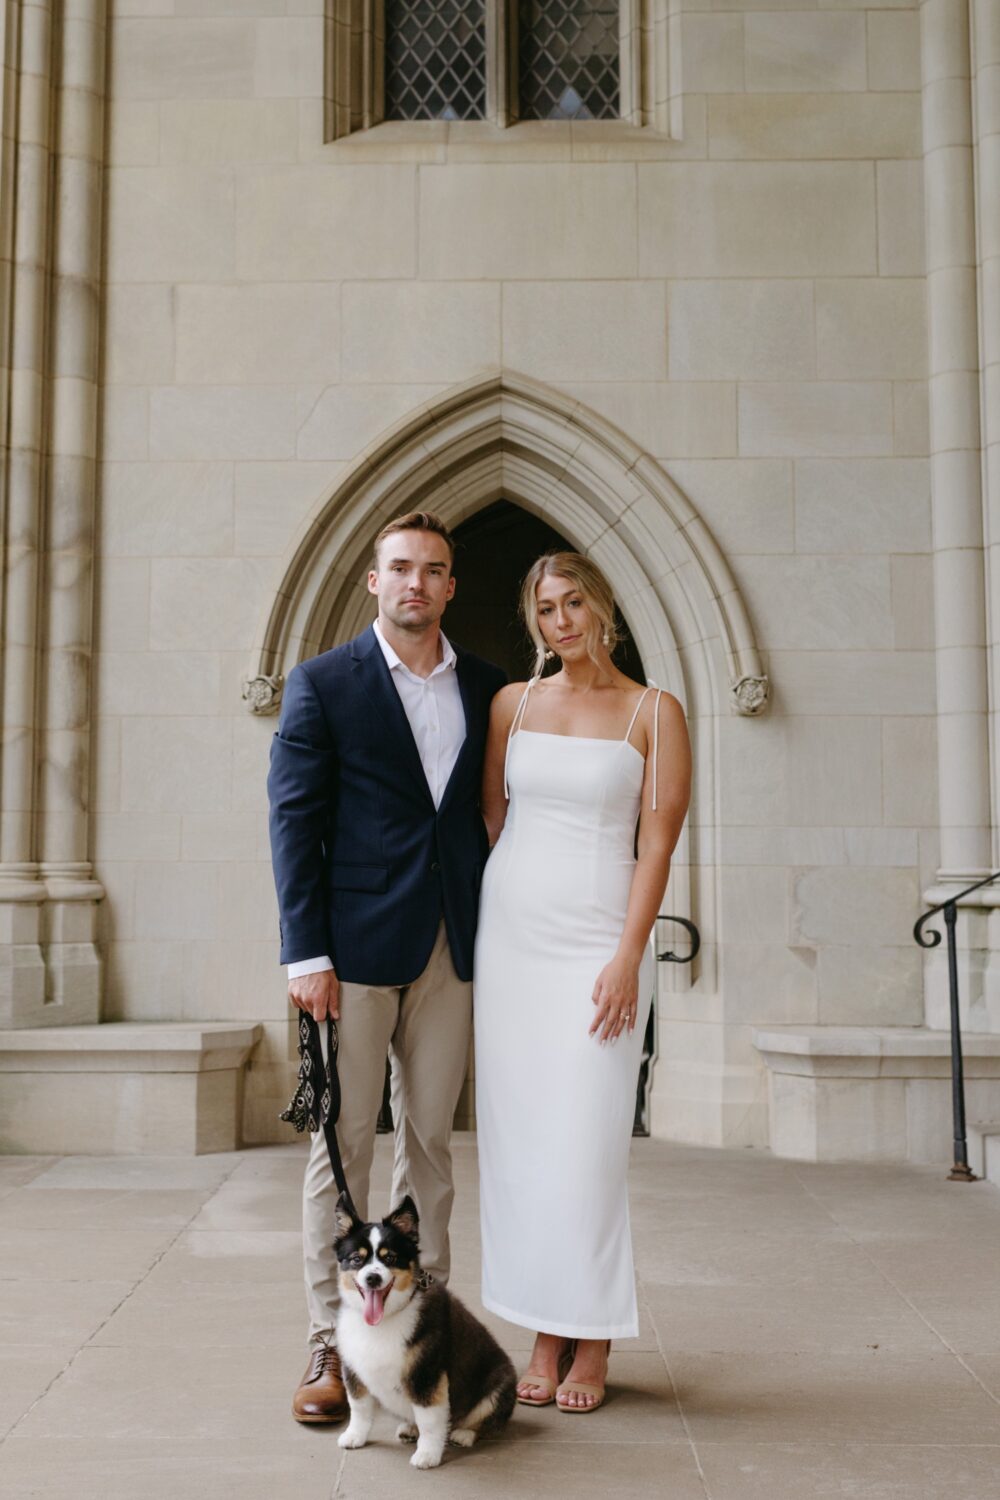 national cathedral engagement session bride and groom standing in archway with dog